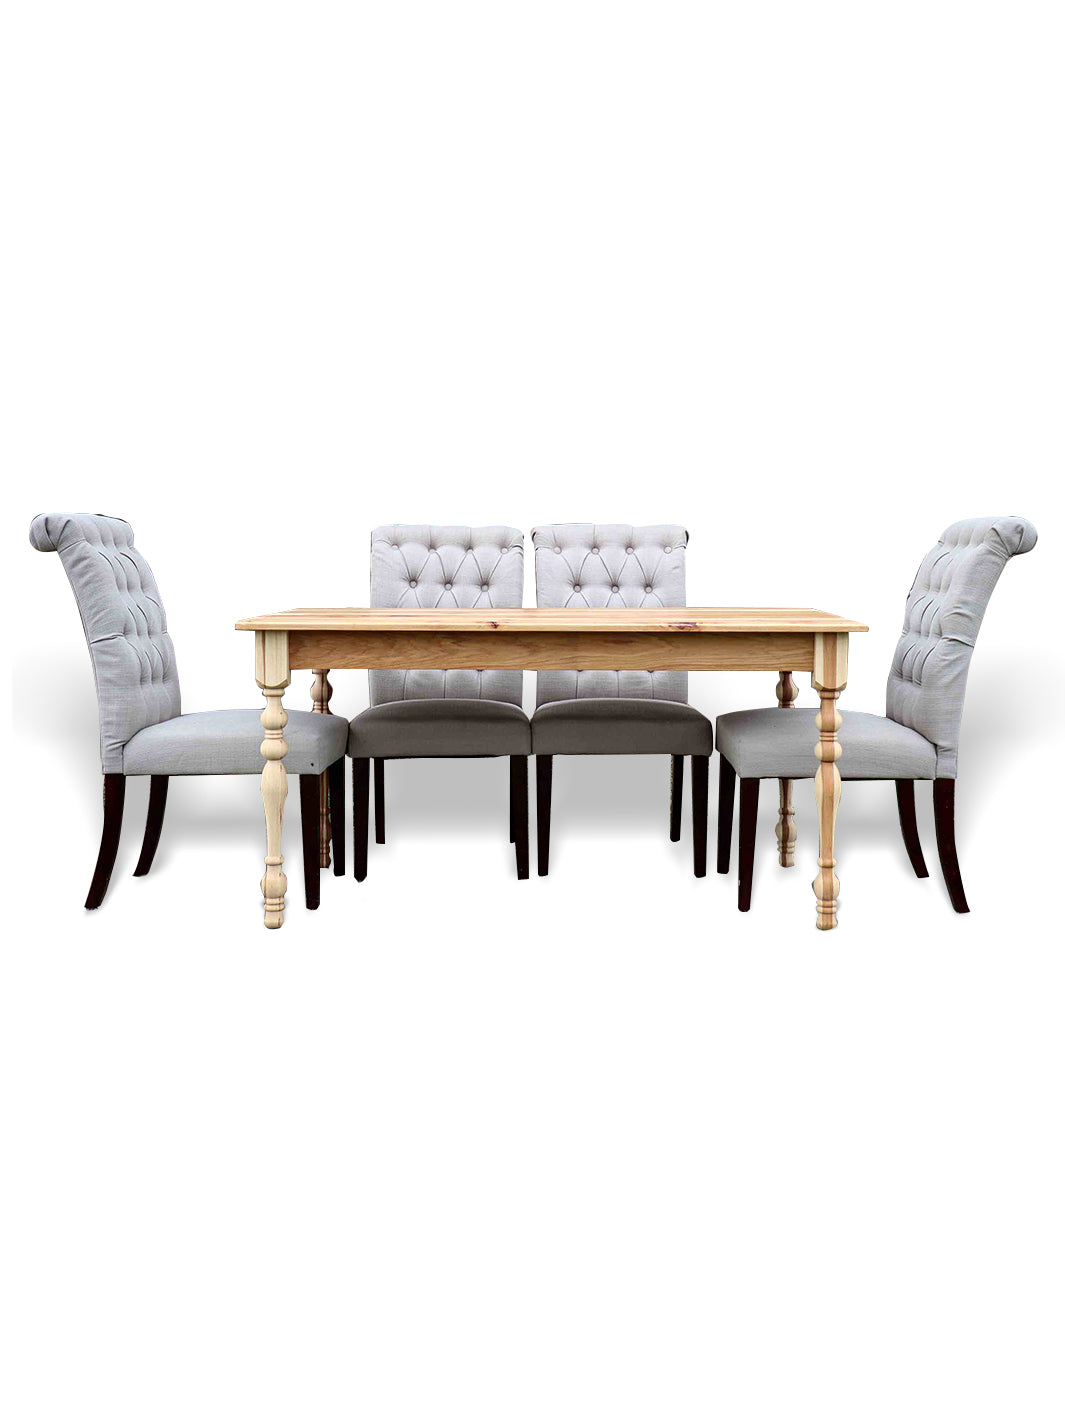 Narrow Hickory Farmhouse Dining Table with Turned Legs Earthly Comfort Dining Tables 1376